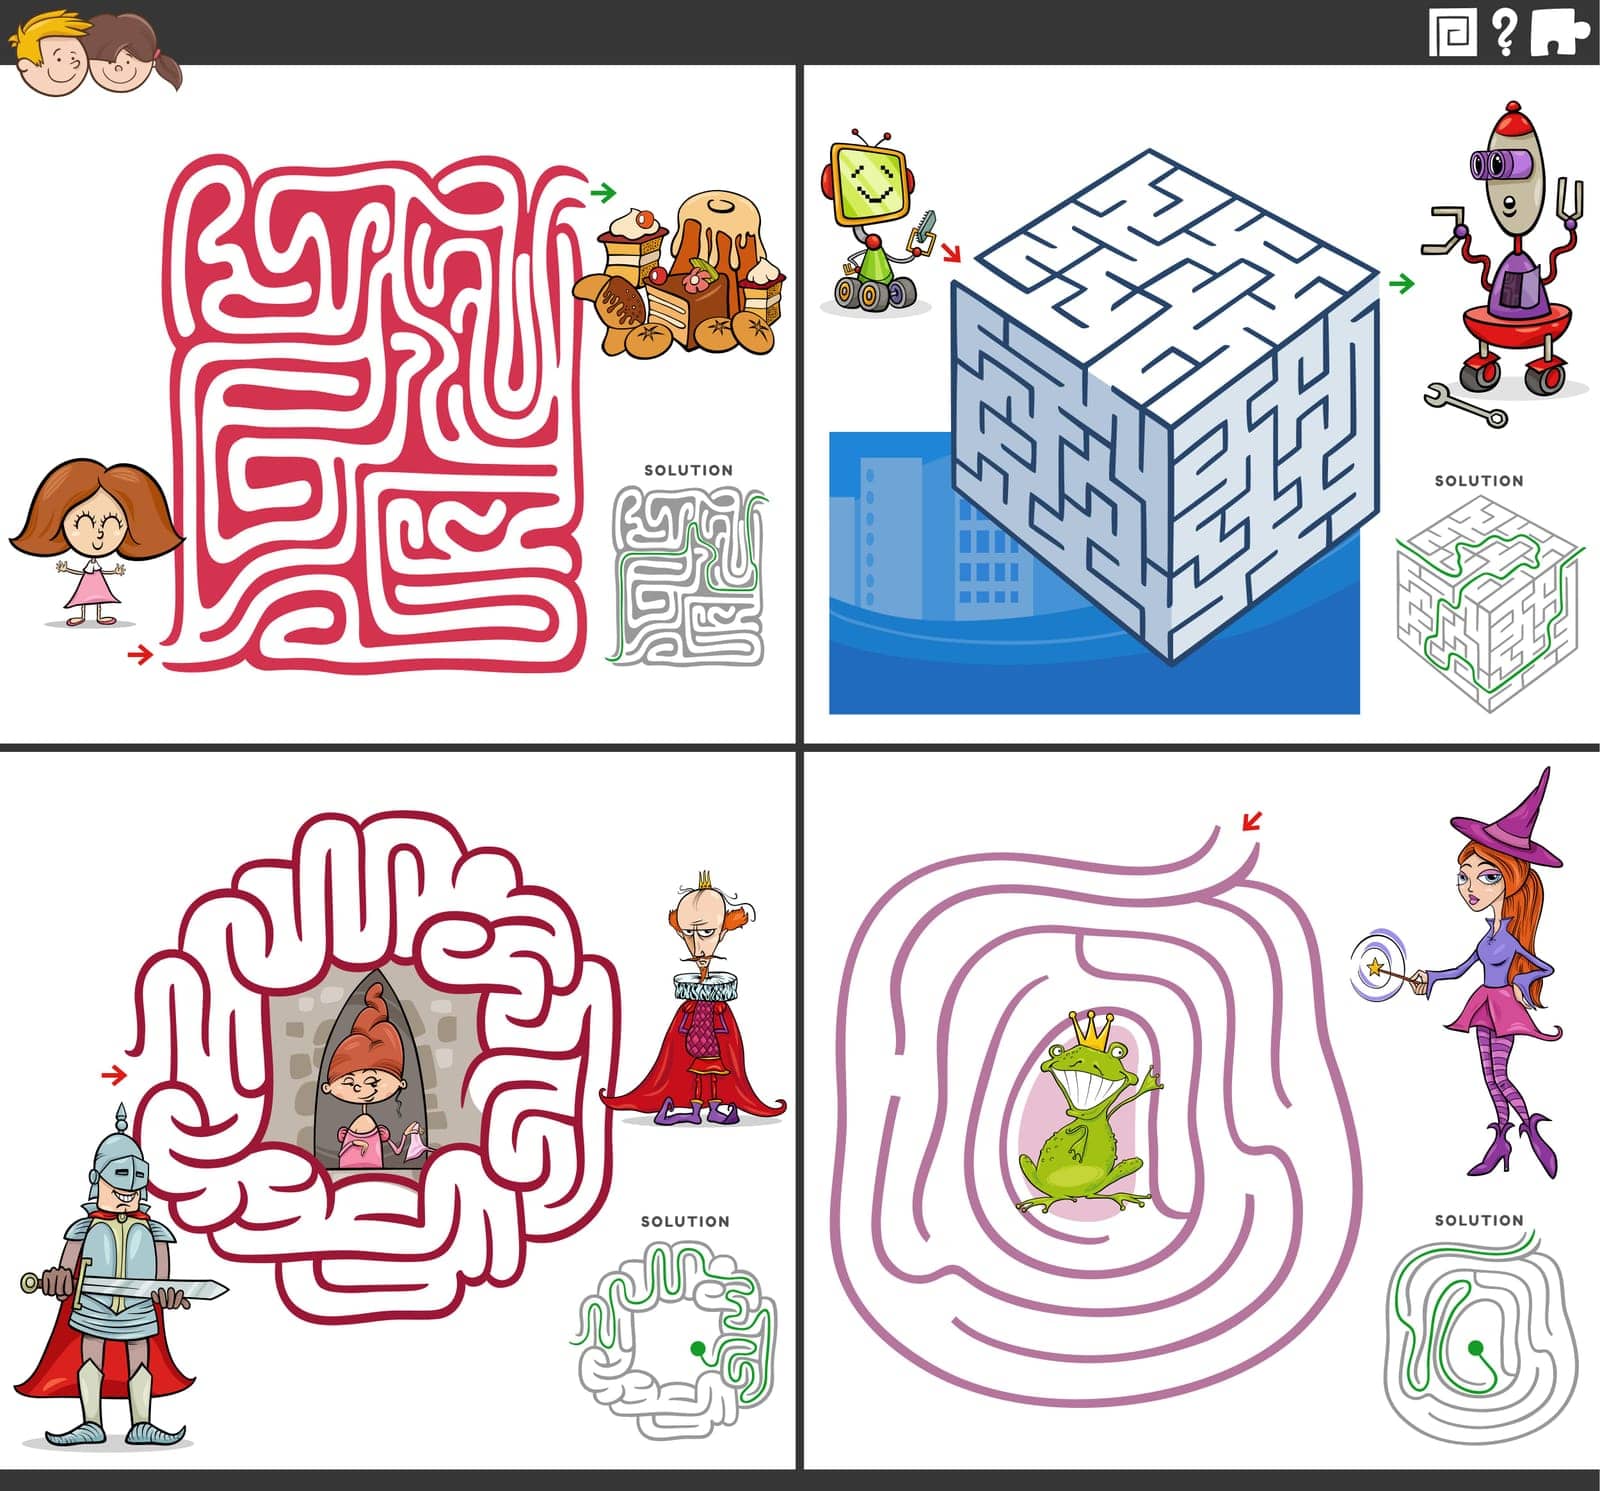 Cartoon illustration of educational maze puzzle games set with funny comic characters